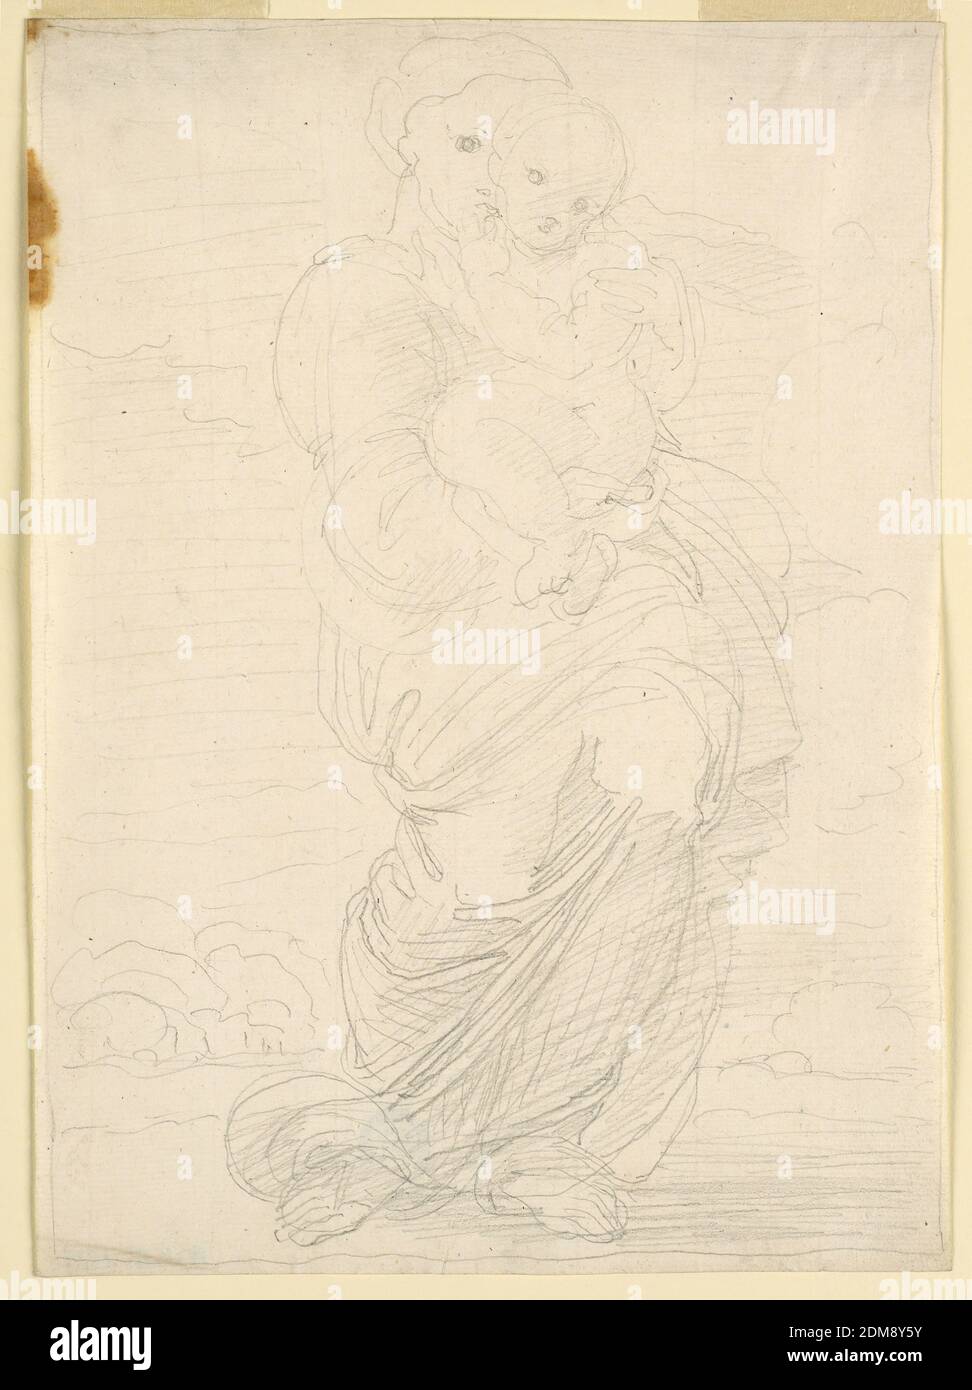 The Virgin and Child, Fortunato Duranti, Italian, 1787 - 1863, Graphite, impressed lines on paper, The Virgin walks through the country, supporting the Child. Framing line., Rome, Italy, 1820–1850, Drawing Stock Photo